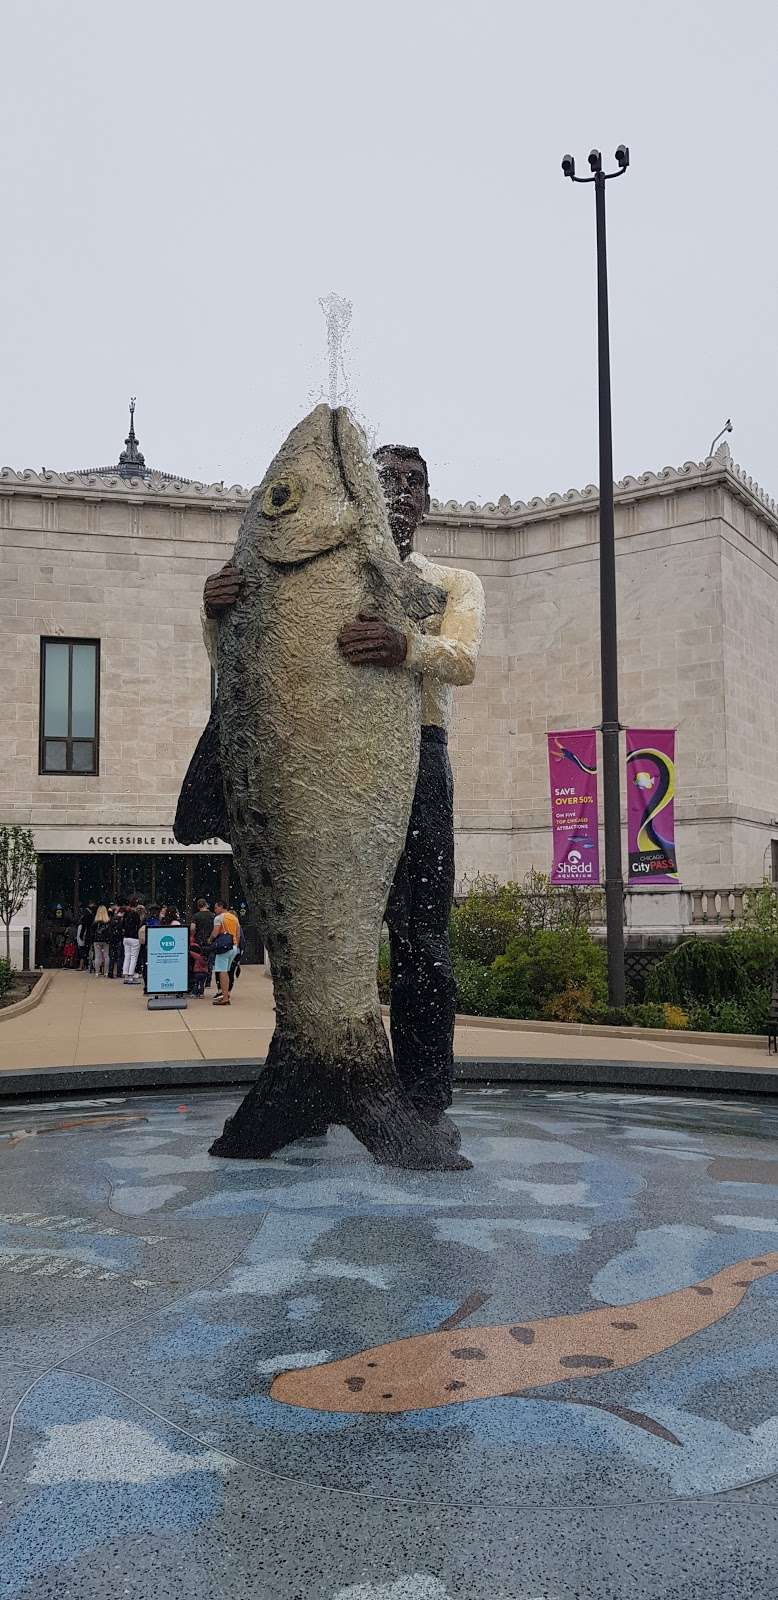 Man With Fish | Chicago, IL 60605, USA